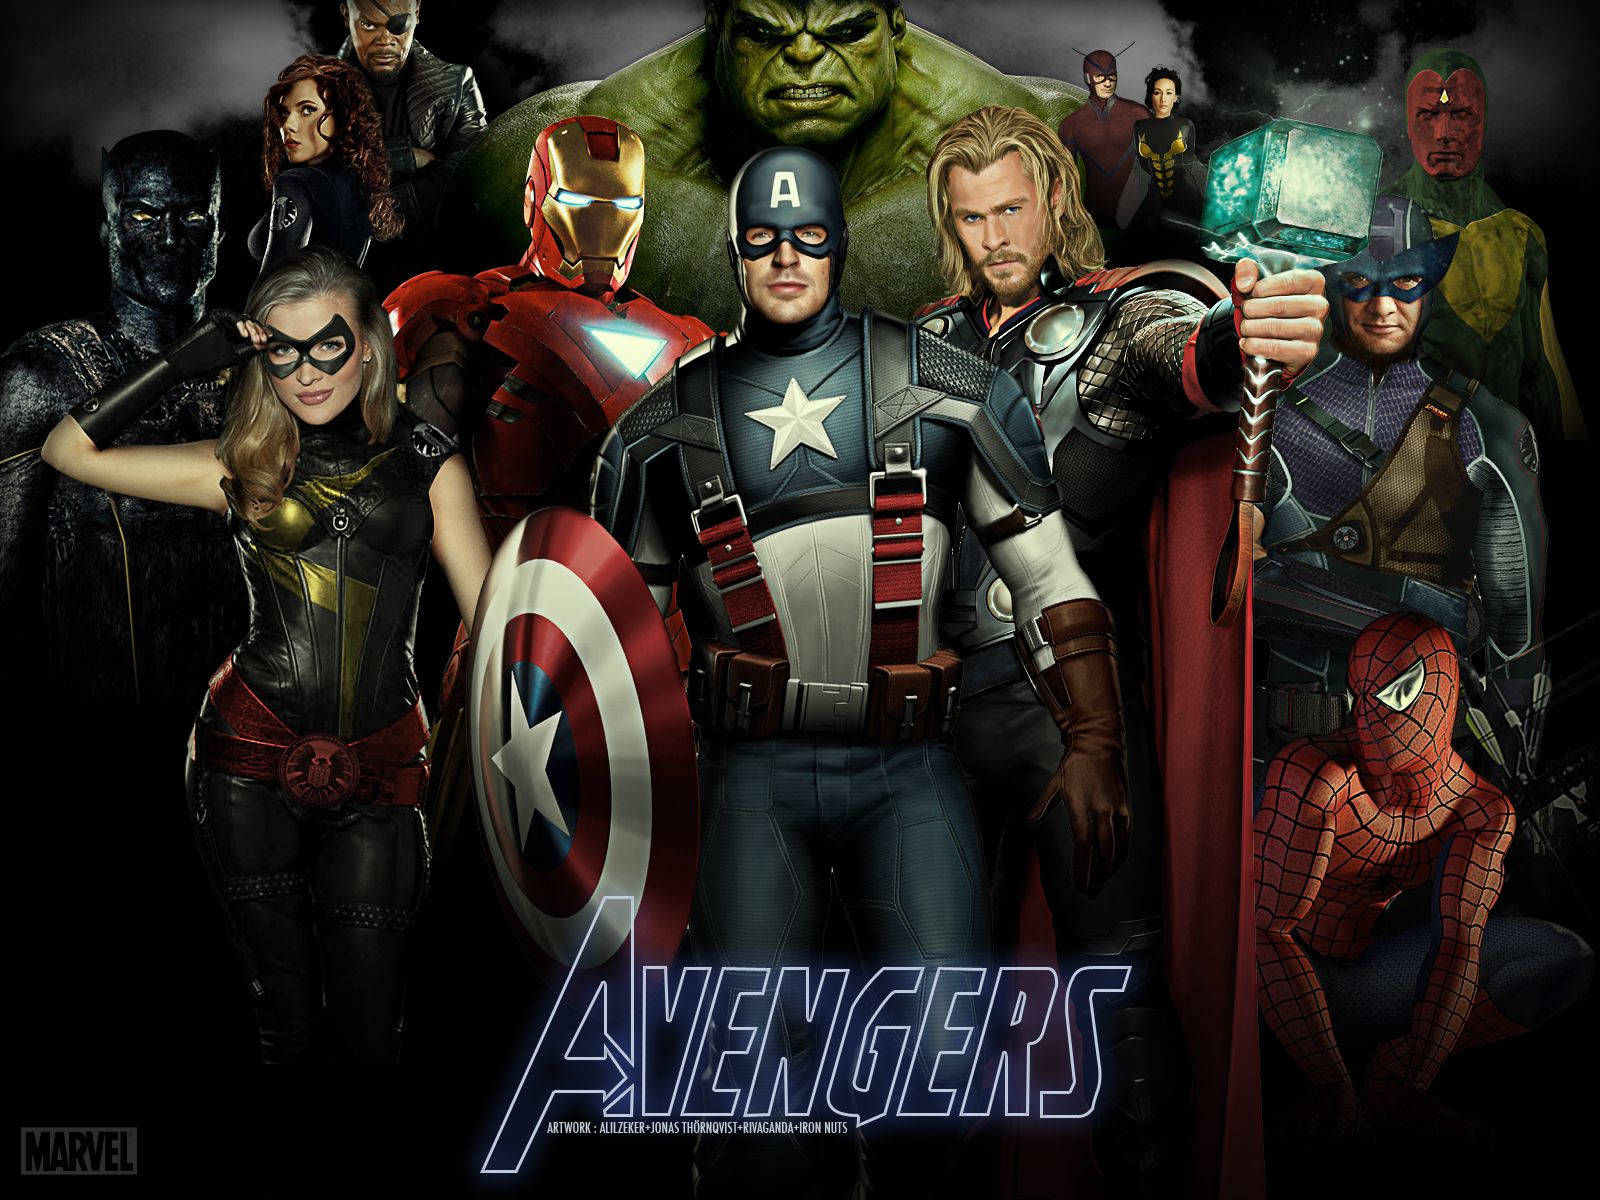 Avengers superhero characters in one, Hulk, Cat Woman, Captain America, Iron Man and others.